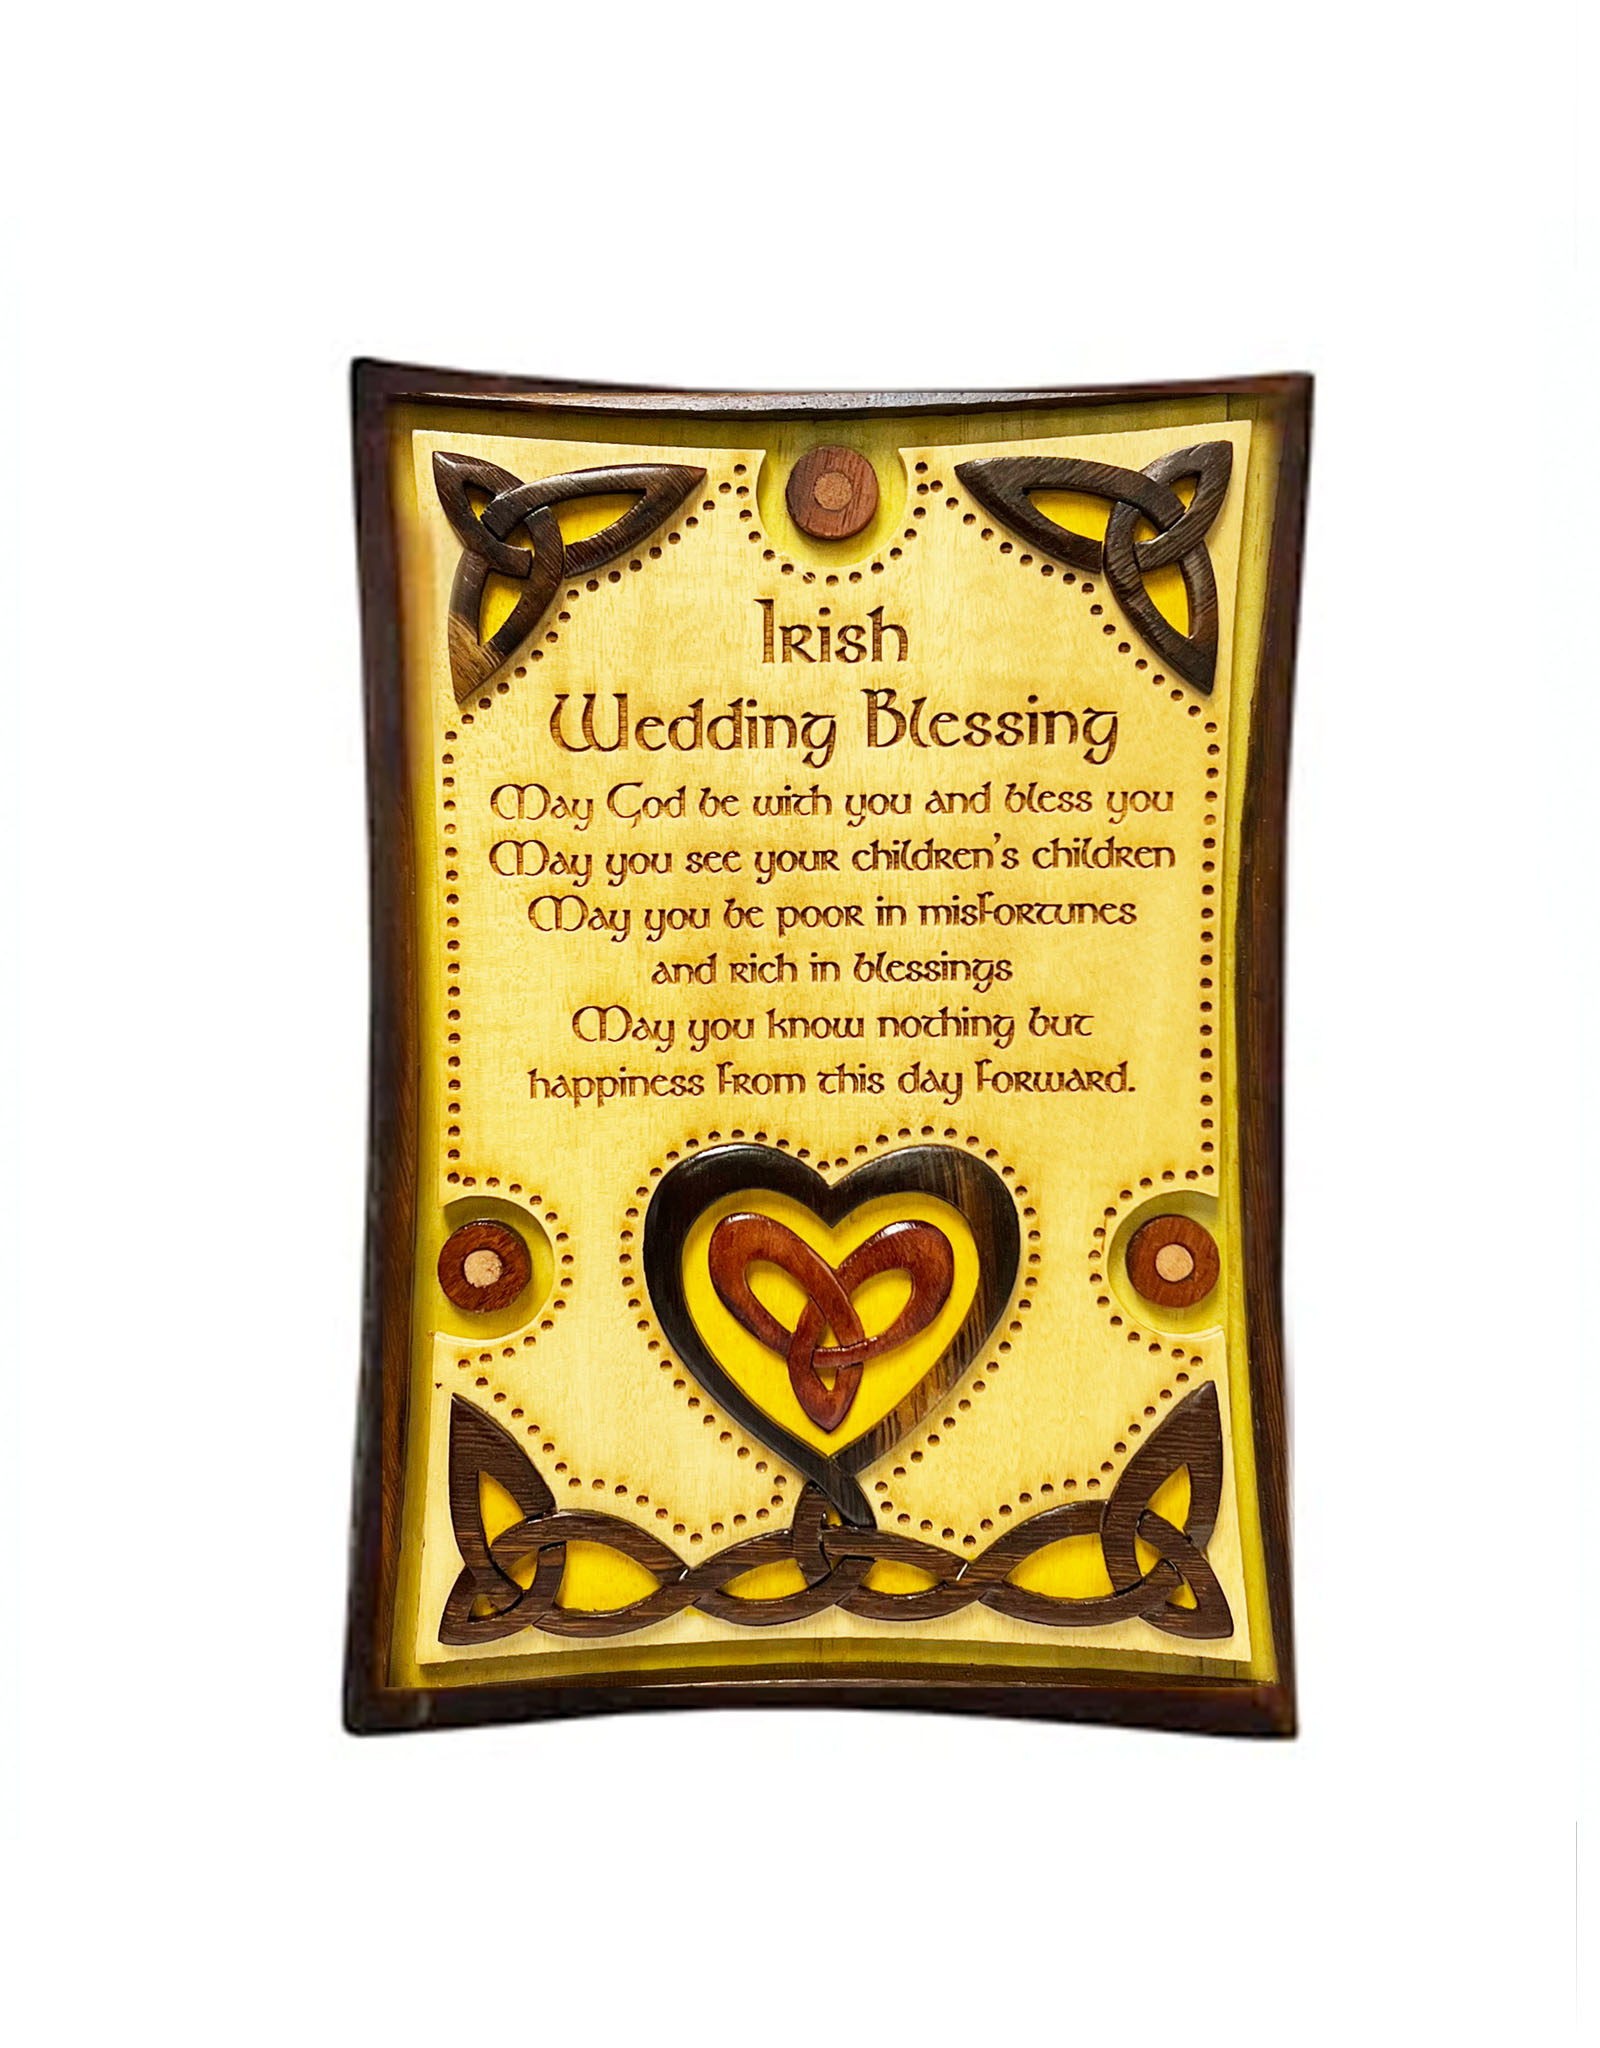 PLAQUES, SIGNS & POSTERS ISLANDCRAFT WOOD WALL ART - Wedding Blessing